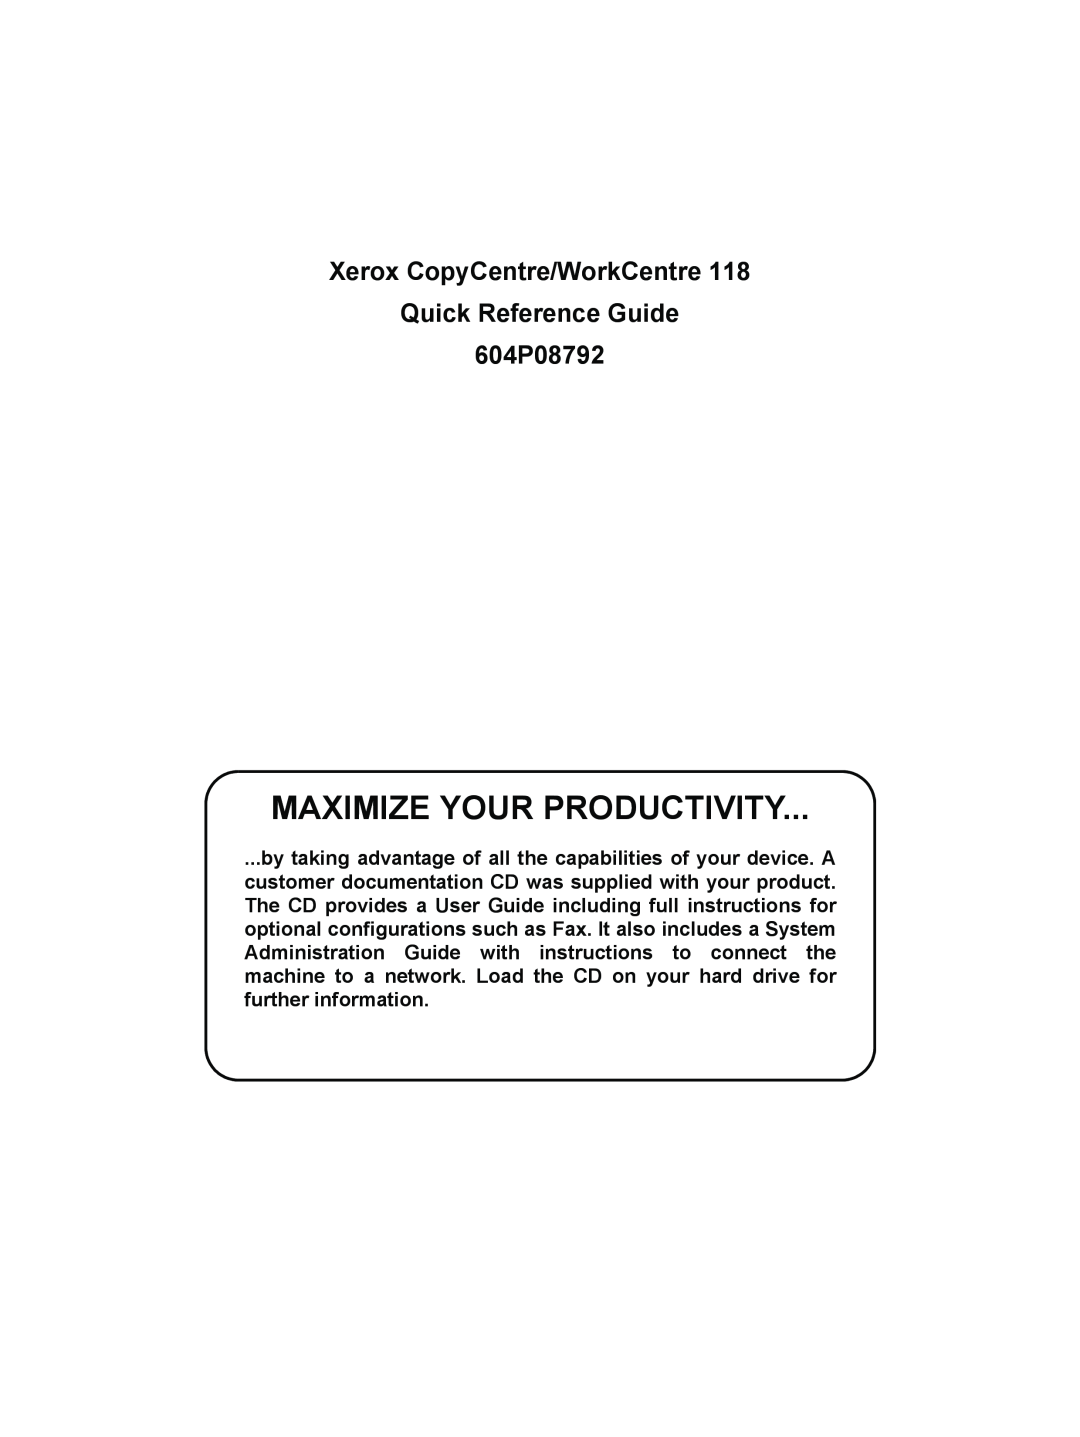 Xerox M118i, C118 manual Xerox CopyCentre/WorkCentre Quick Reference Guide 604P08792, Maximize Your Productivity 